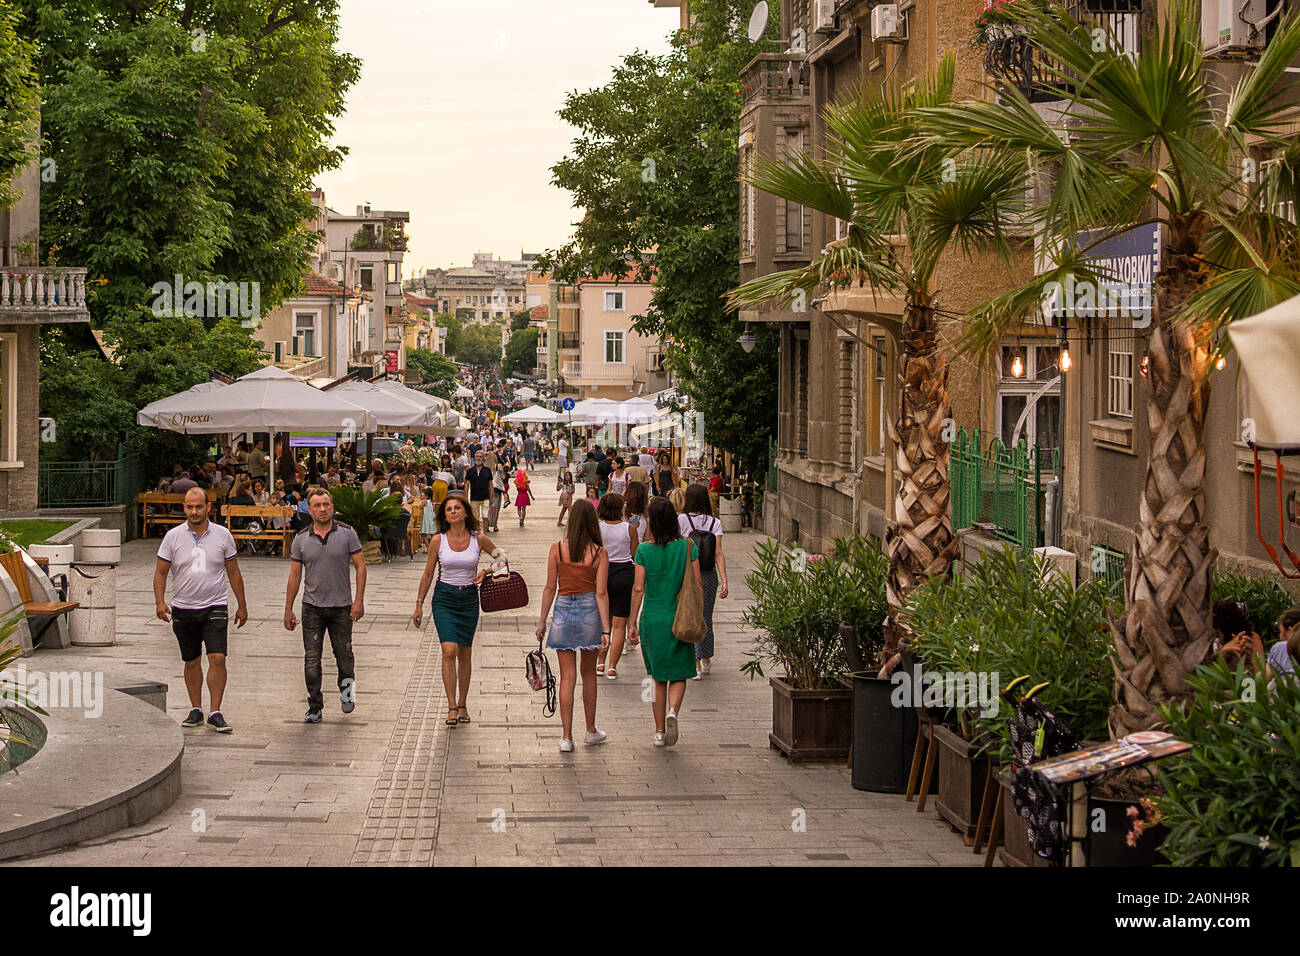 Burgas, Bulgaria - June 21, 2019: In the evening Bulgarians and tourists relax while strolling in Aleko Bogoridi in Burgas, Bulgaria Stock Photo